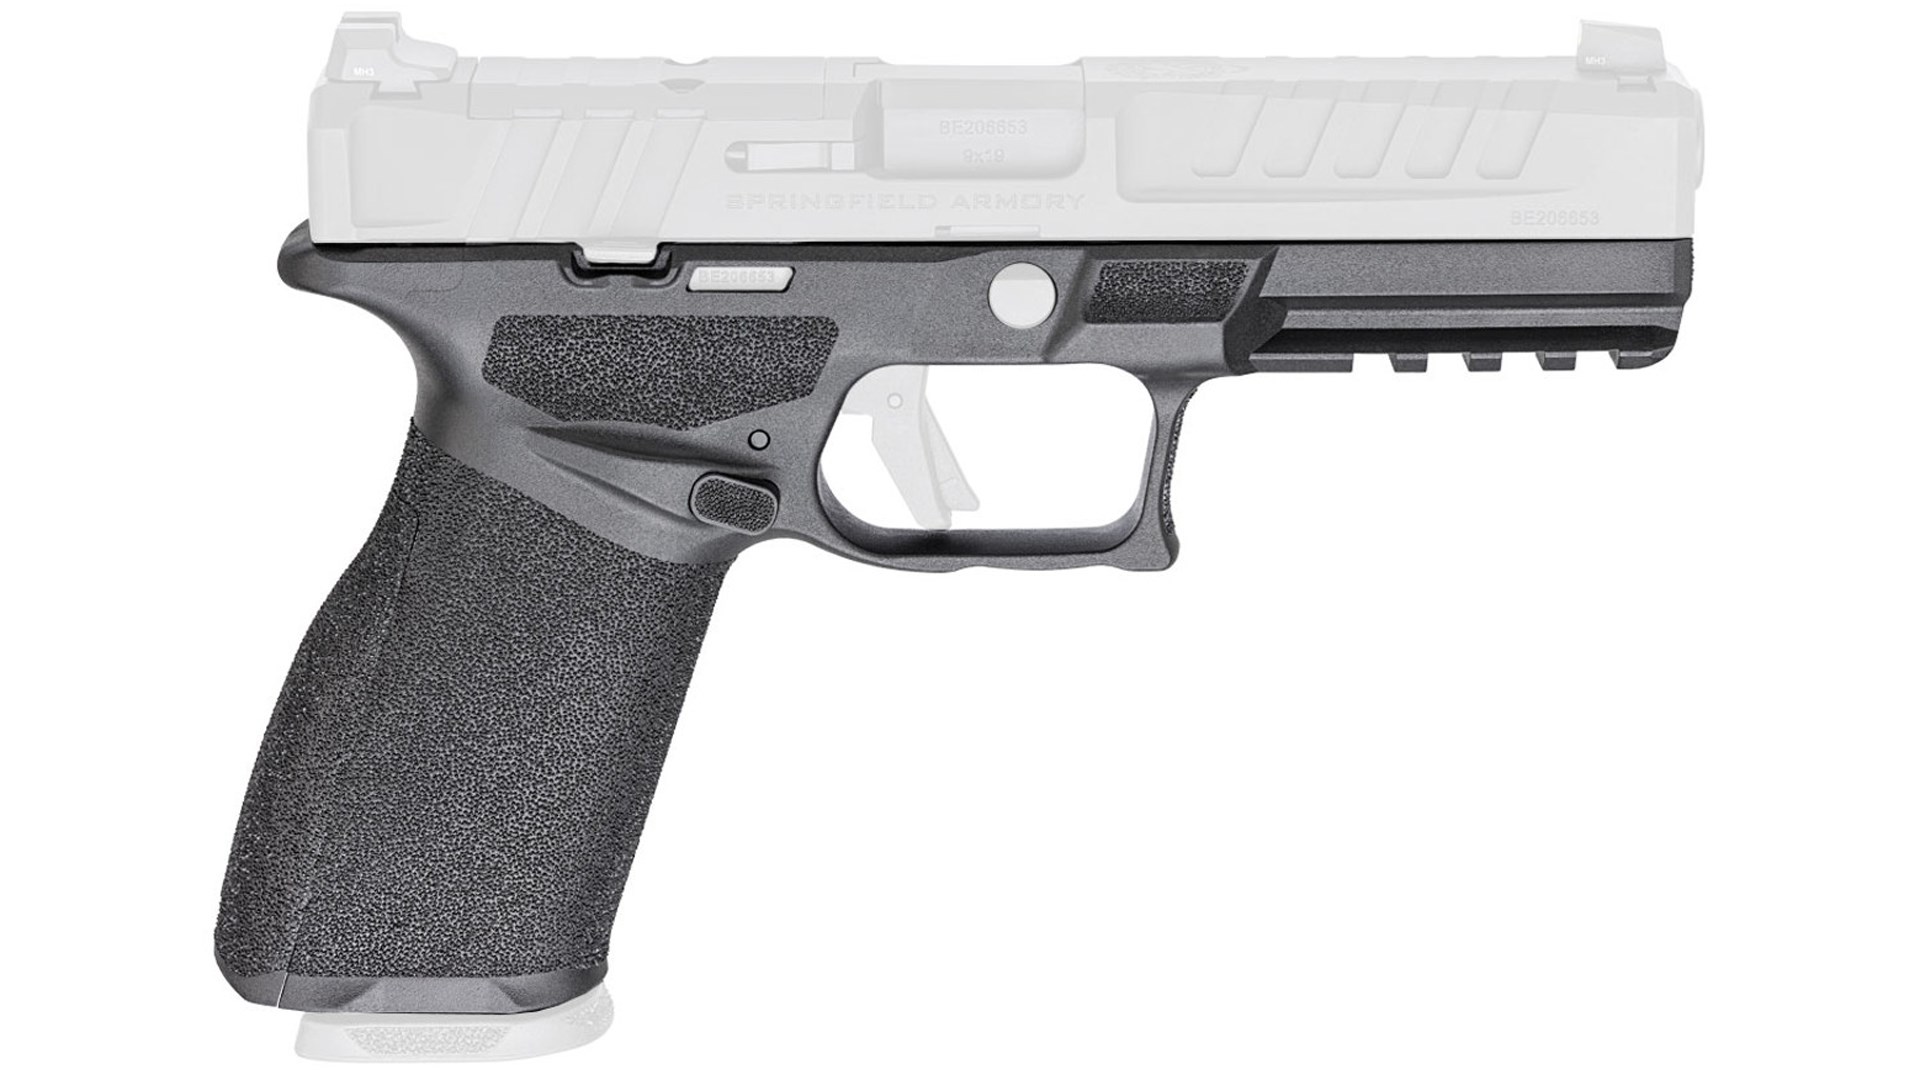 Springfield Armory Echelon 9 mm striker-fired pistol ghosted gray highlighting replaceble grip module foreground